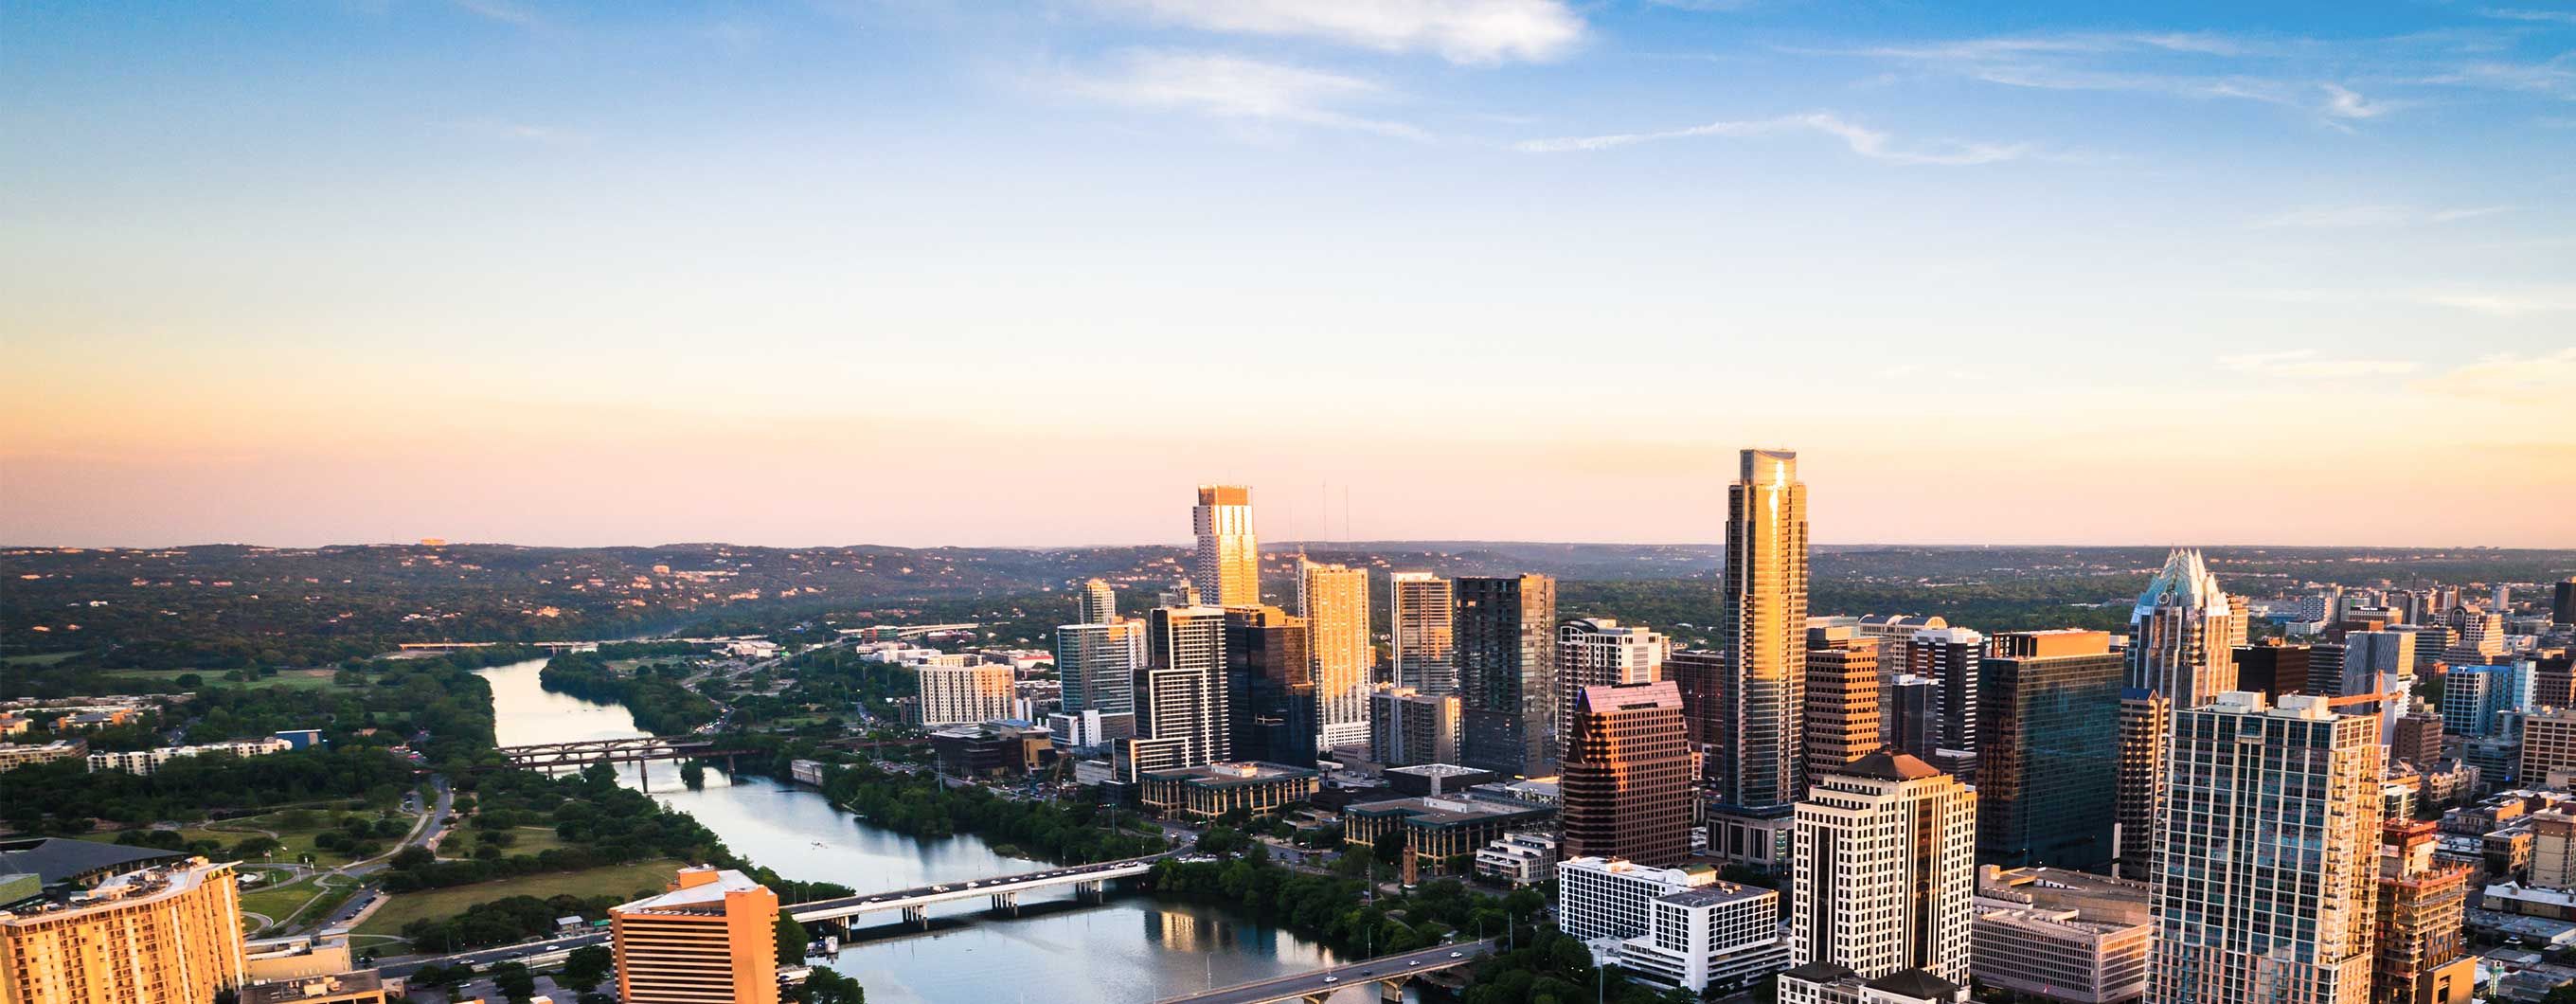 Image of the Austin city skyline and lake with a blue sky with scattered clouds